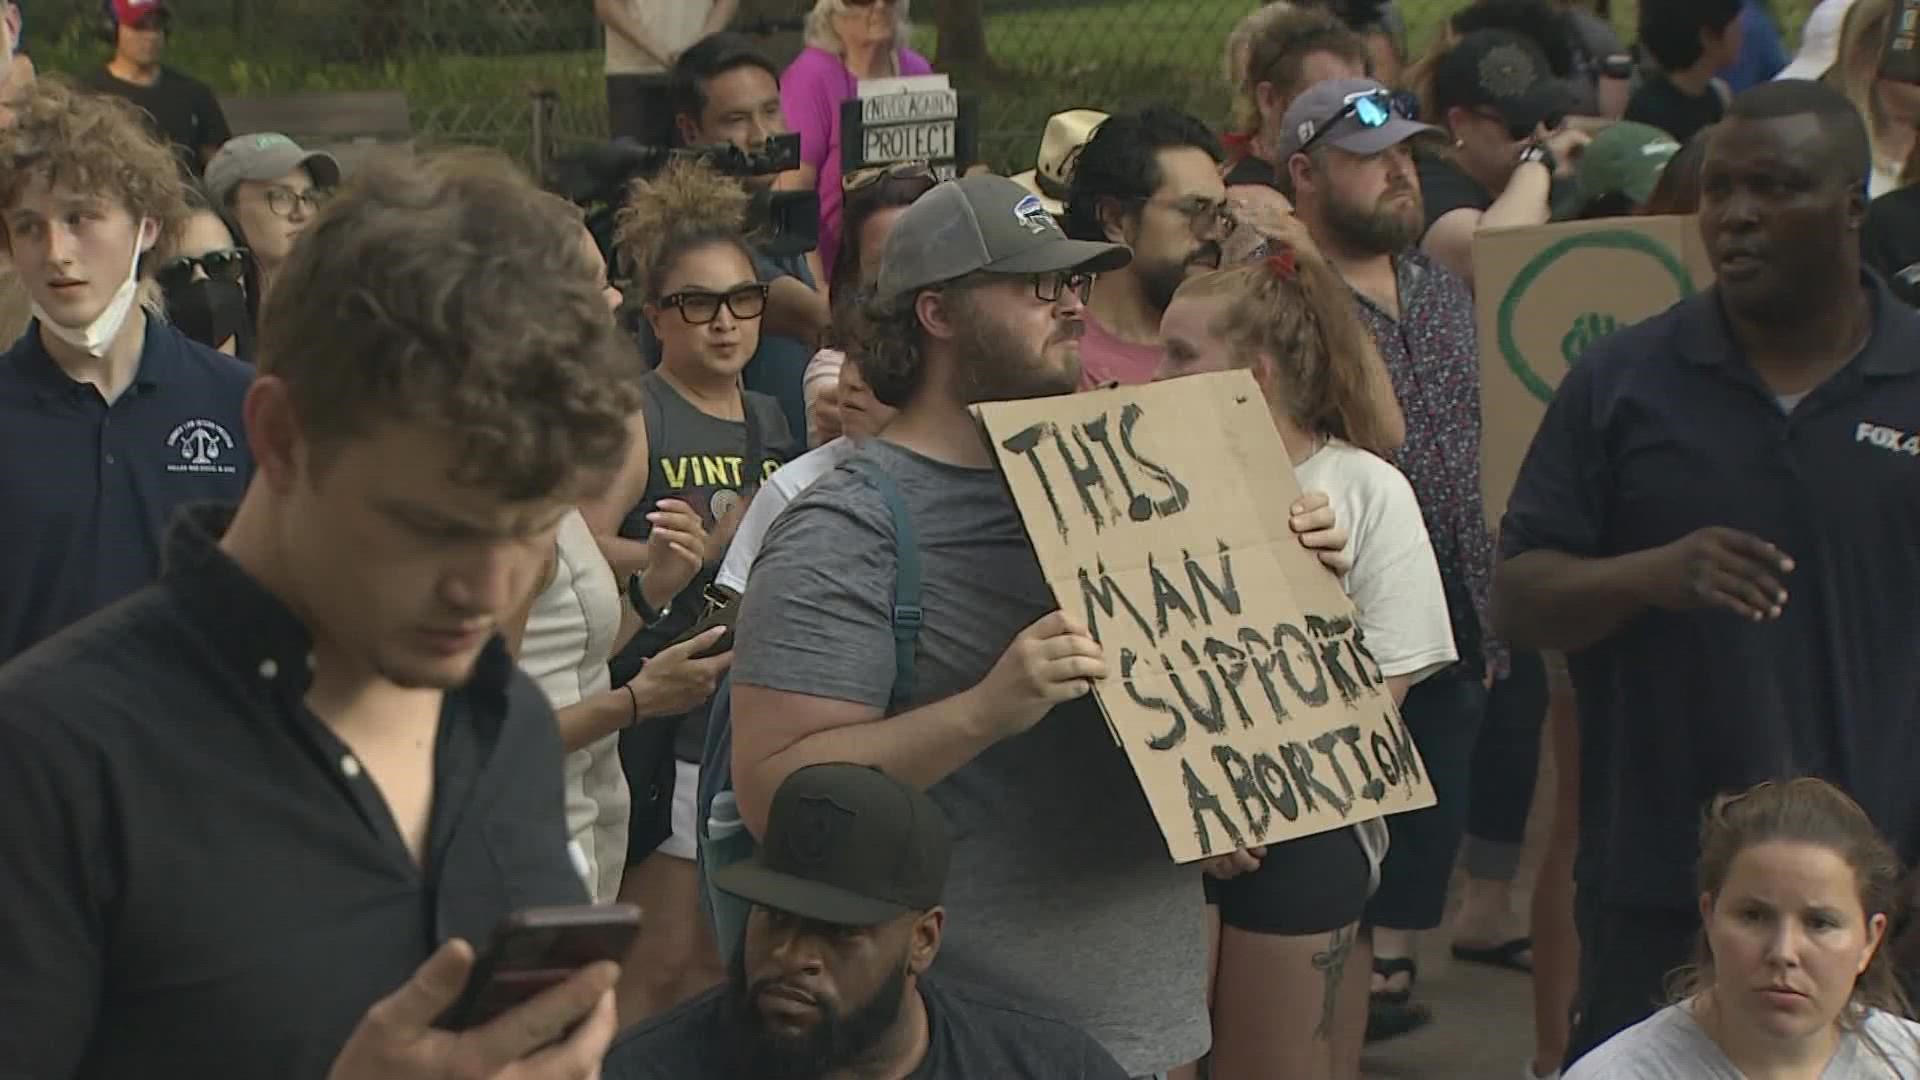 A rally in Dallas drew a large crowd after the Supreme Court overturned Roe v. Wade.